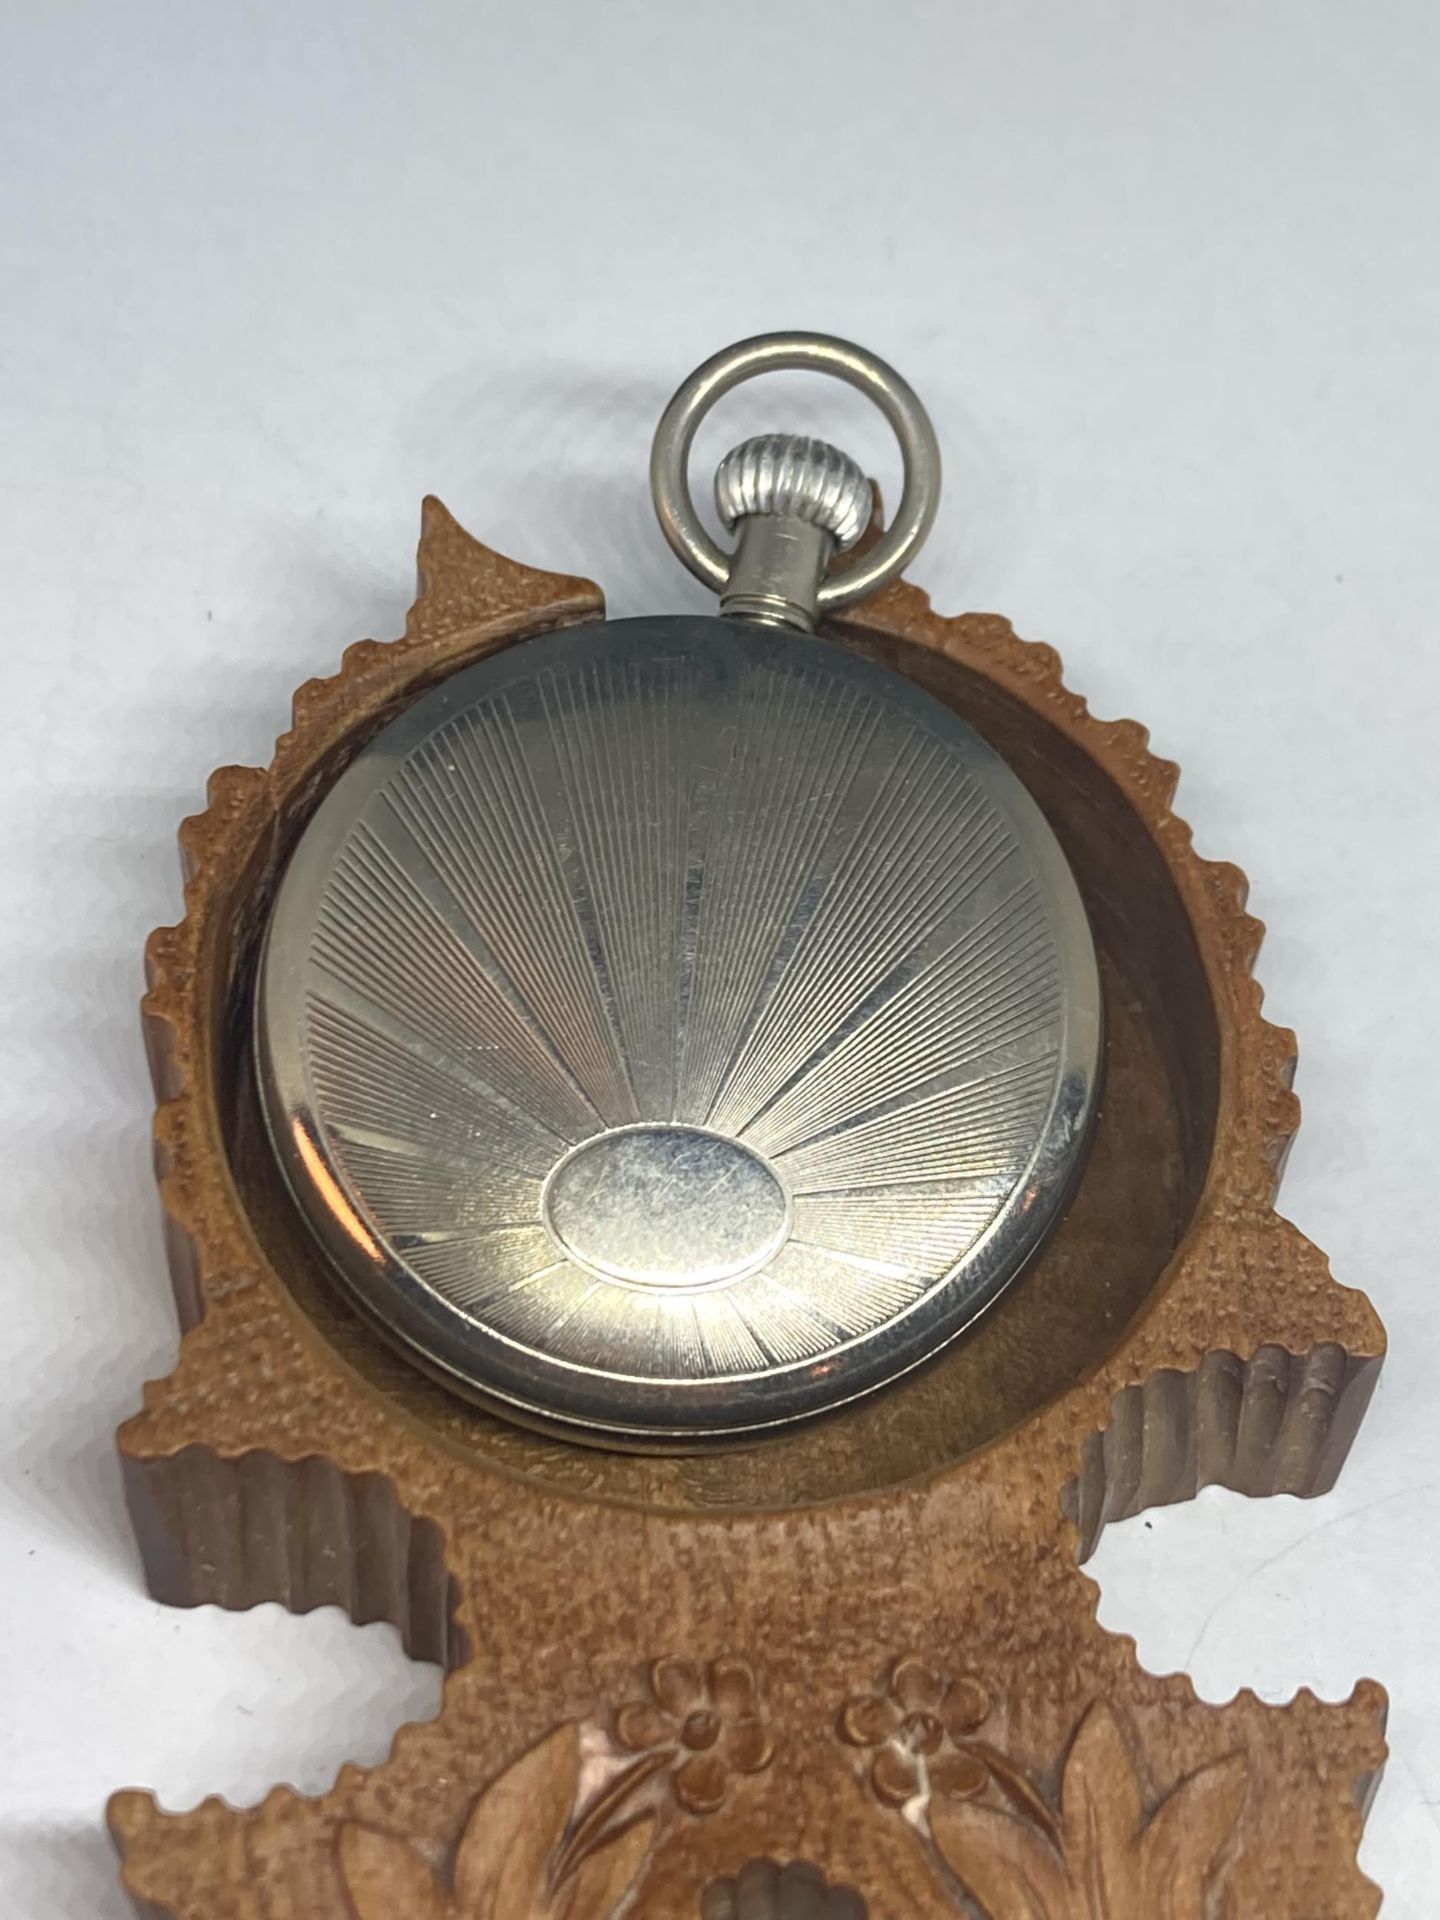 A RAILWAY TIMEKEEPER DUKE POCKET WATCH IN A CARVED WOODEN CASE - Image 3 of 4